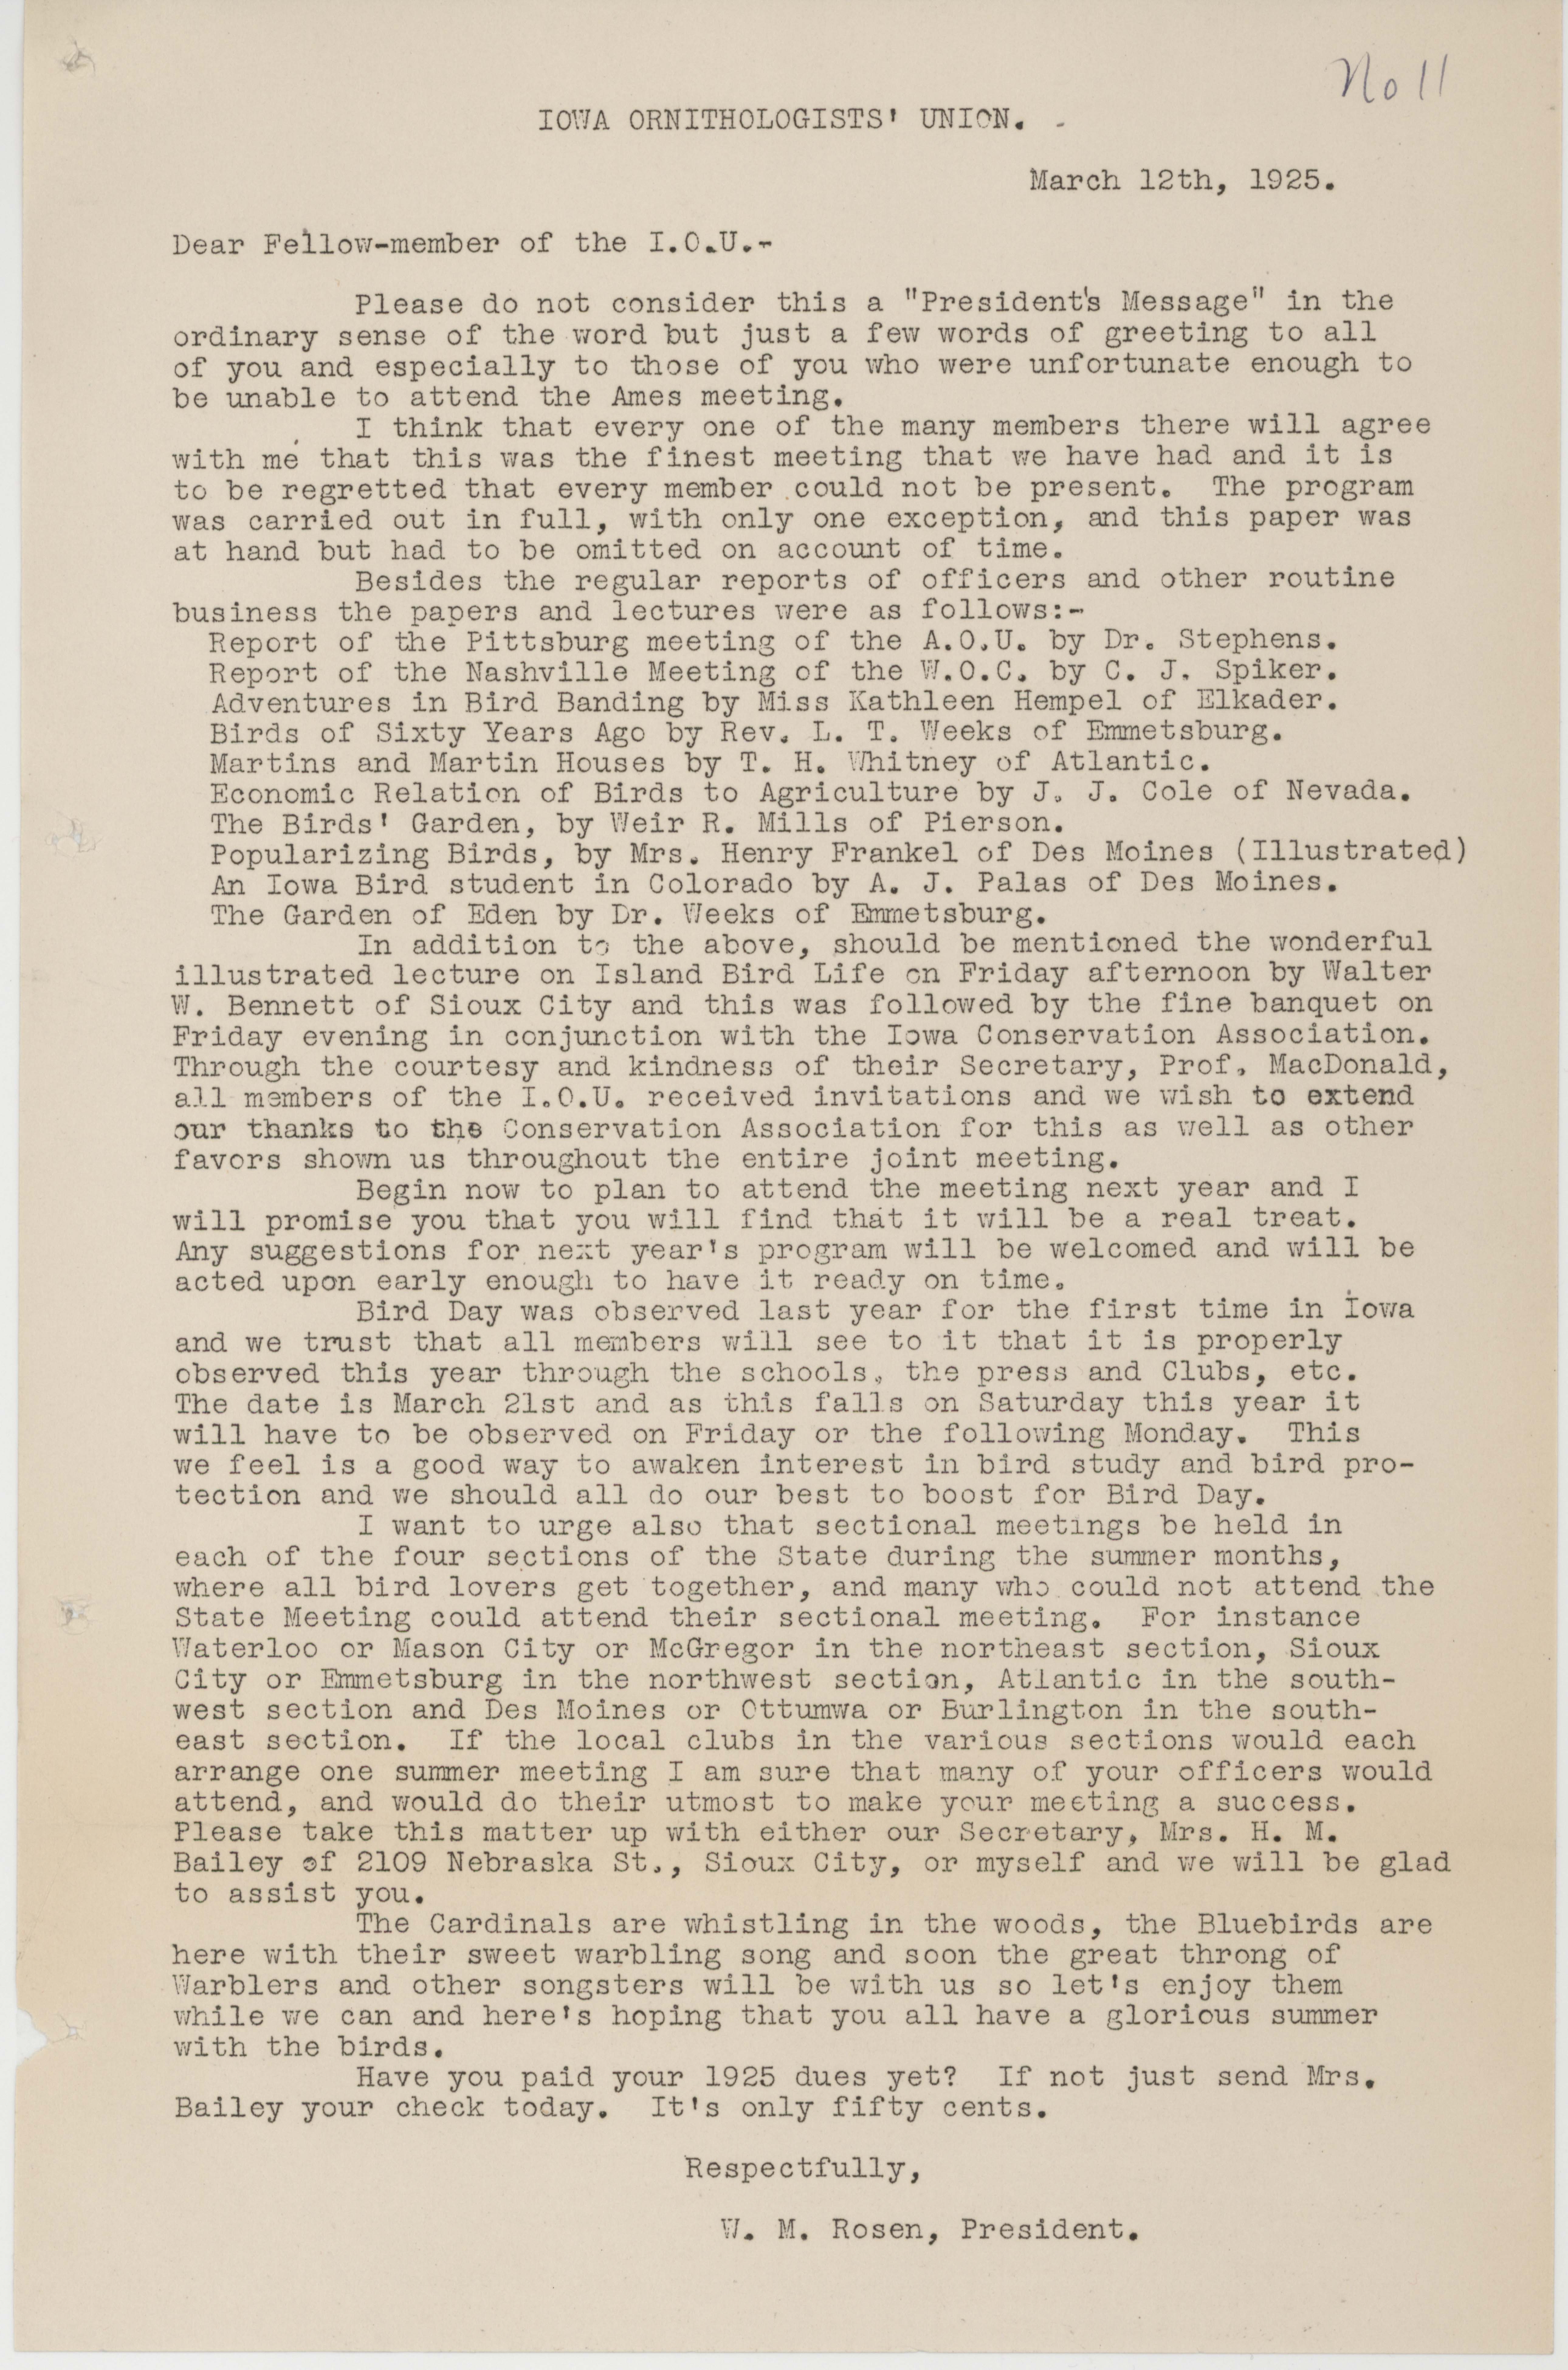 Letter to the members of the Iowa Ornithologists' Union regarding the recent annual meeting, March 12, 1925